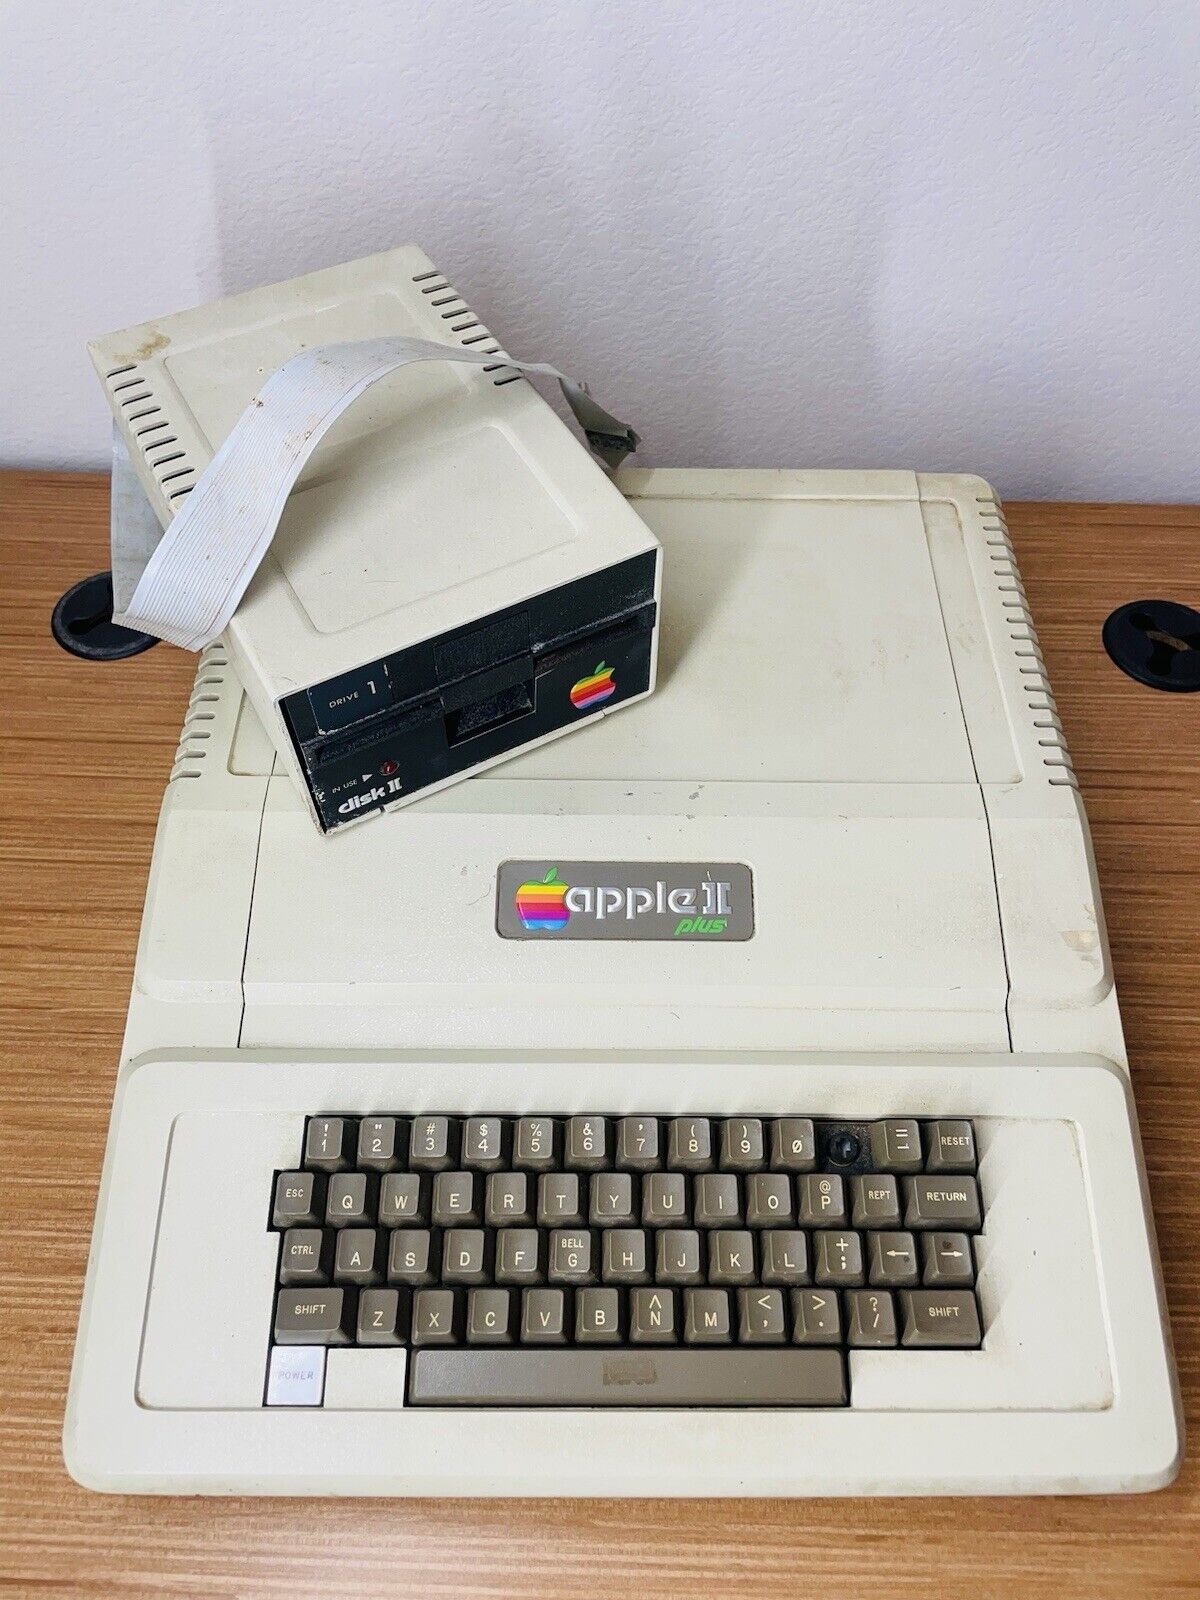 Vintage Apple II Plus A2S1048 And A2M0003 Personal Computer sold as is for parts